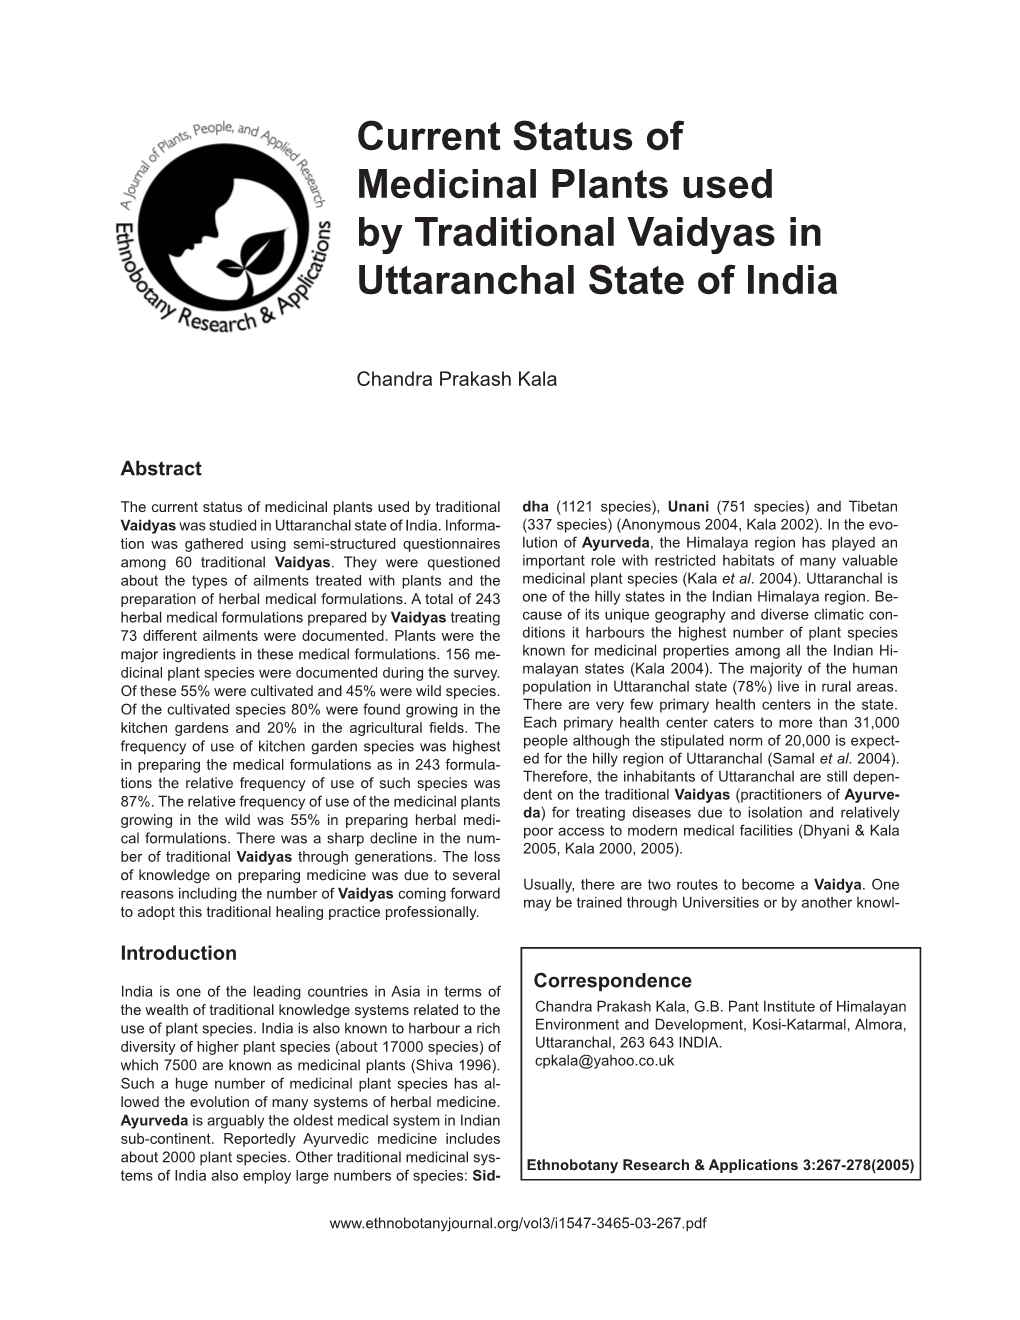 Current Status of Medicinal Plants Used by Traditional Vaidyas in Uttaranchal State of India